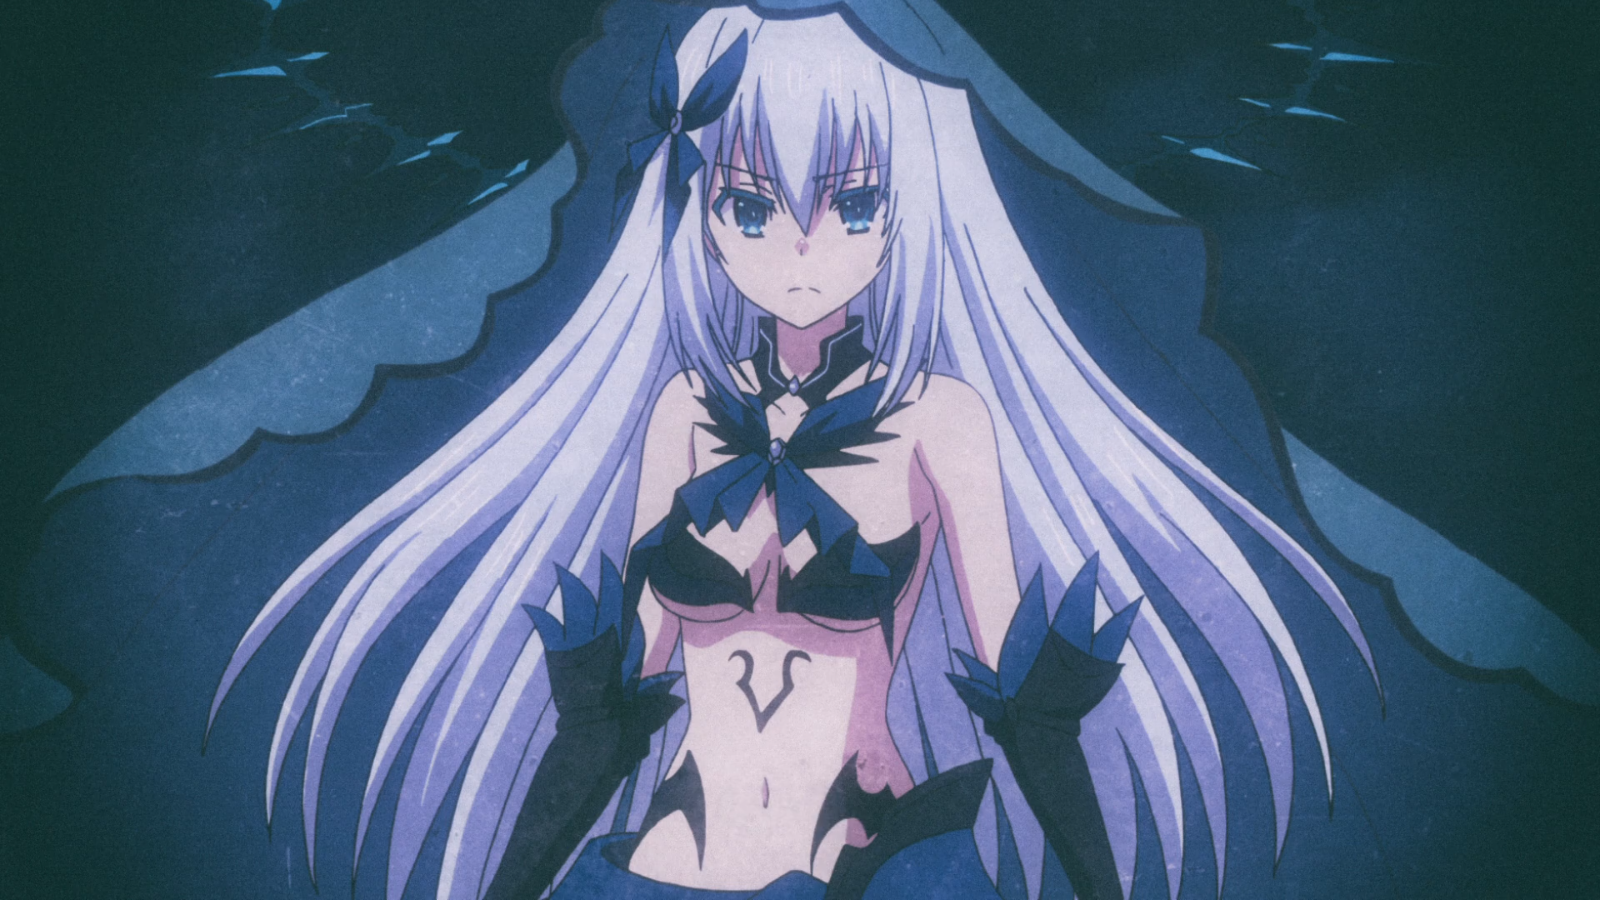 Date a Live IV Episode 7 - Return of the Inverse Tohka and New Origami